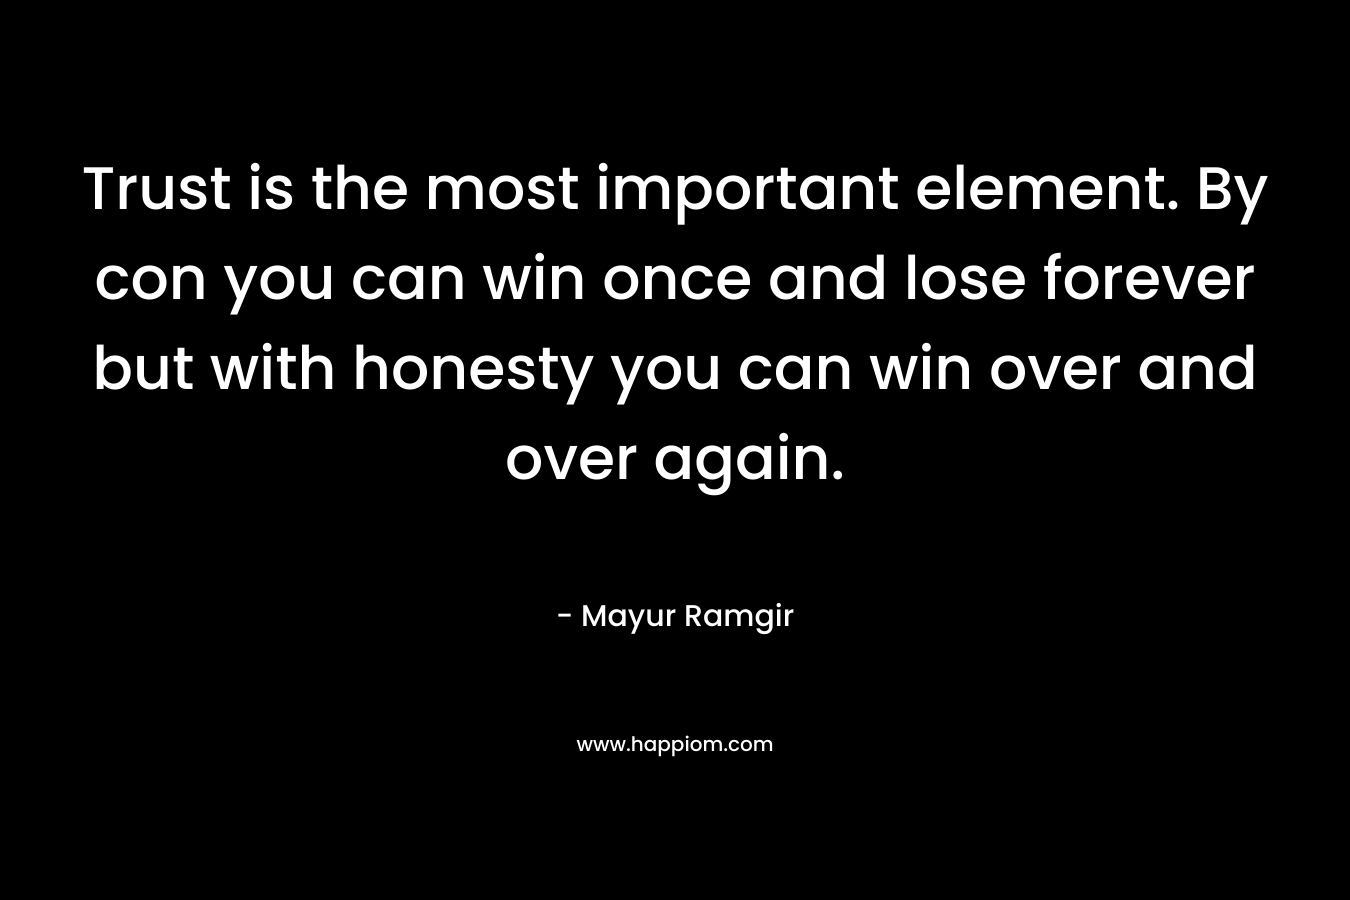 Trust is the most important element. By con you can win once and lose forever but with honesty you can win over and over again. – Mayur Ramgir